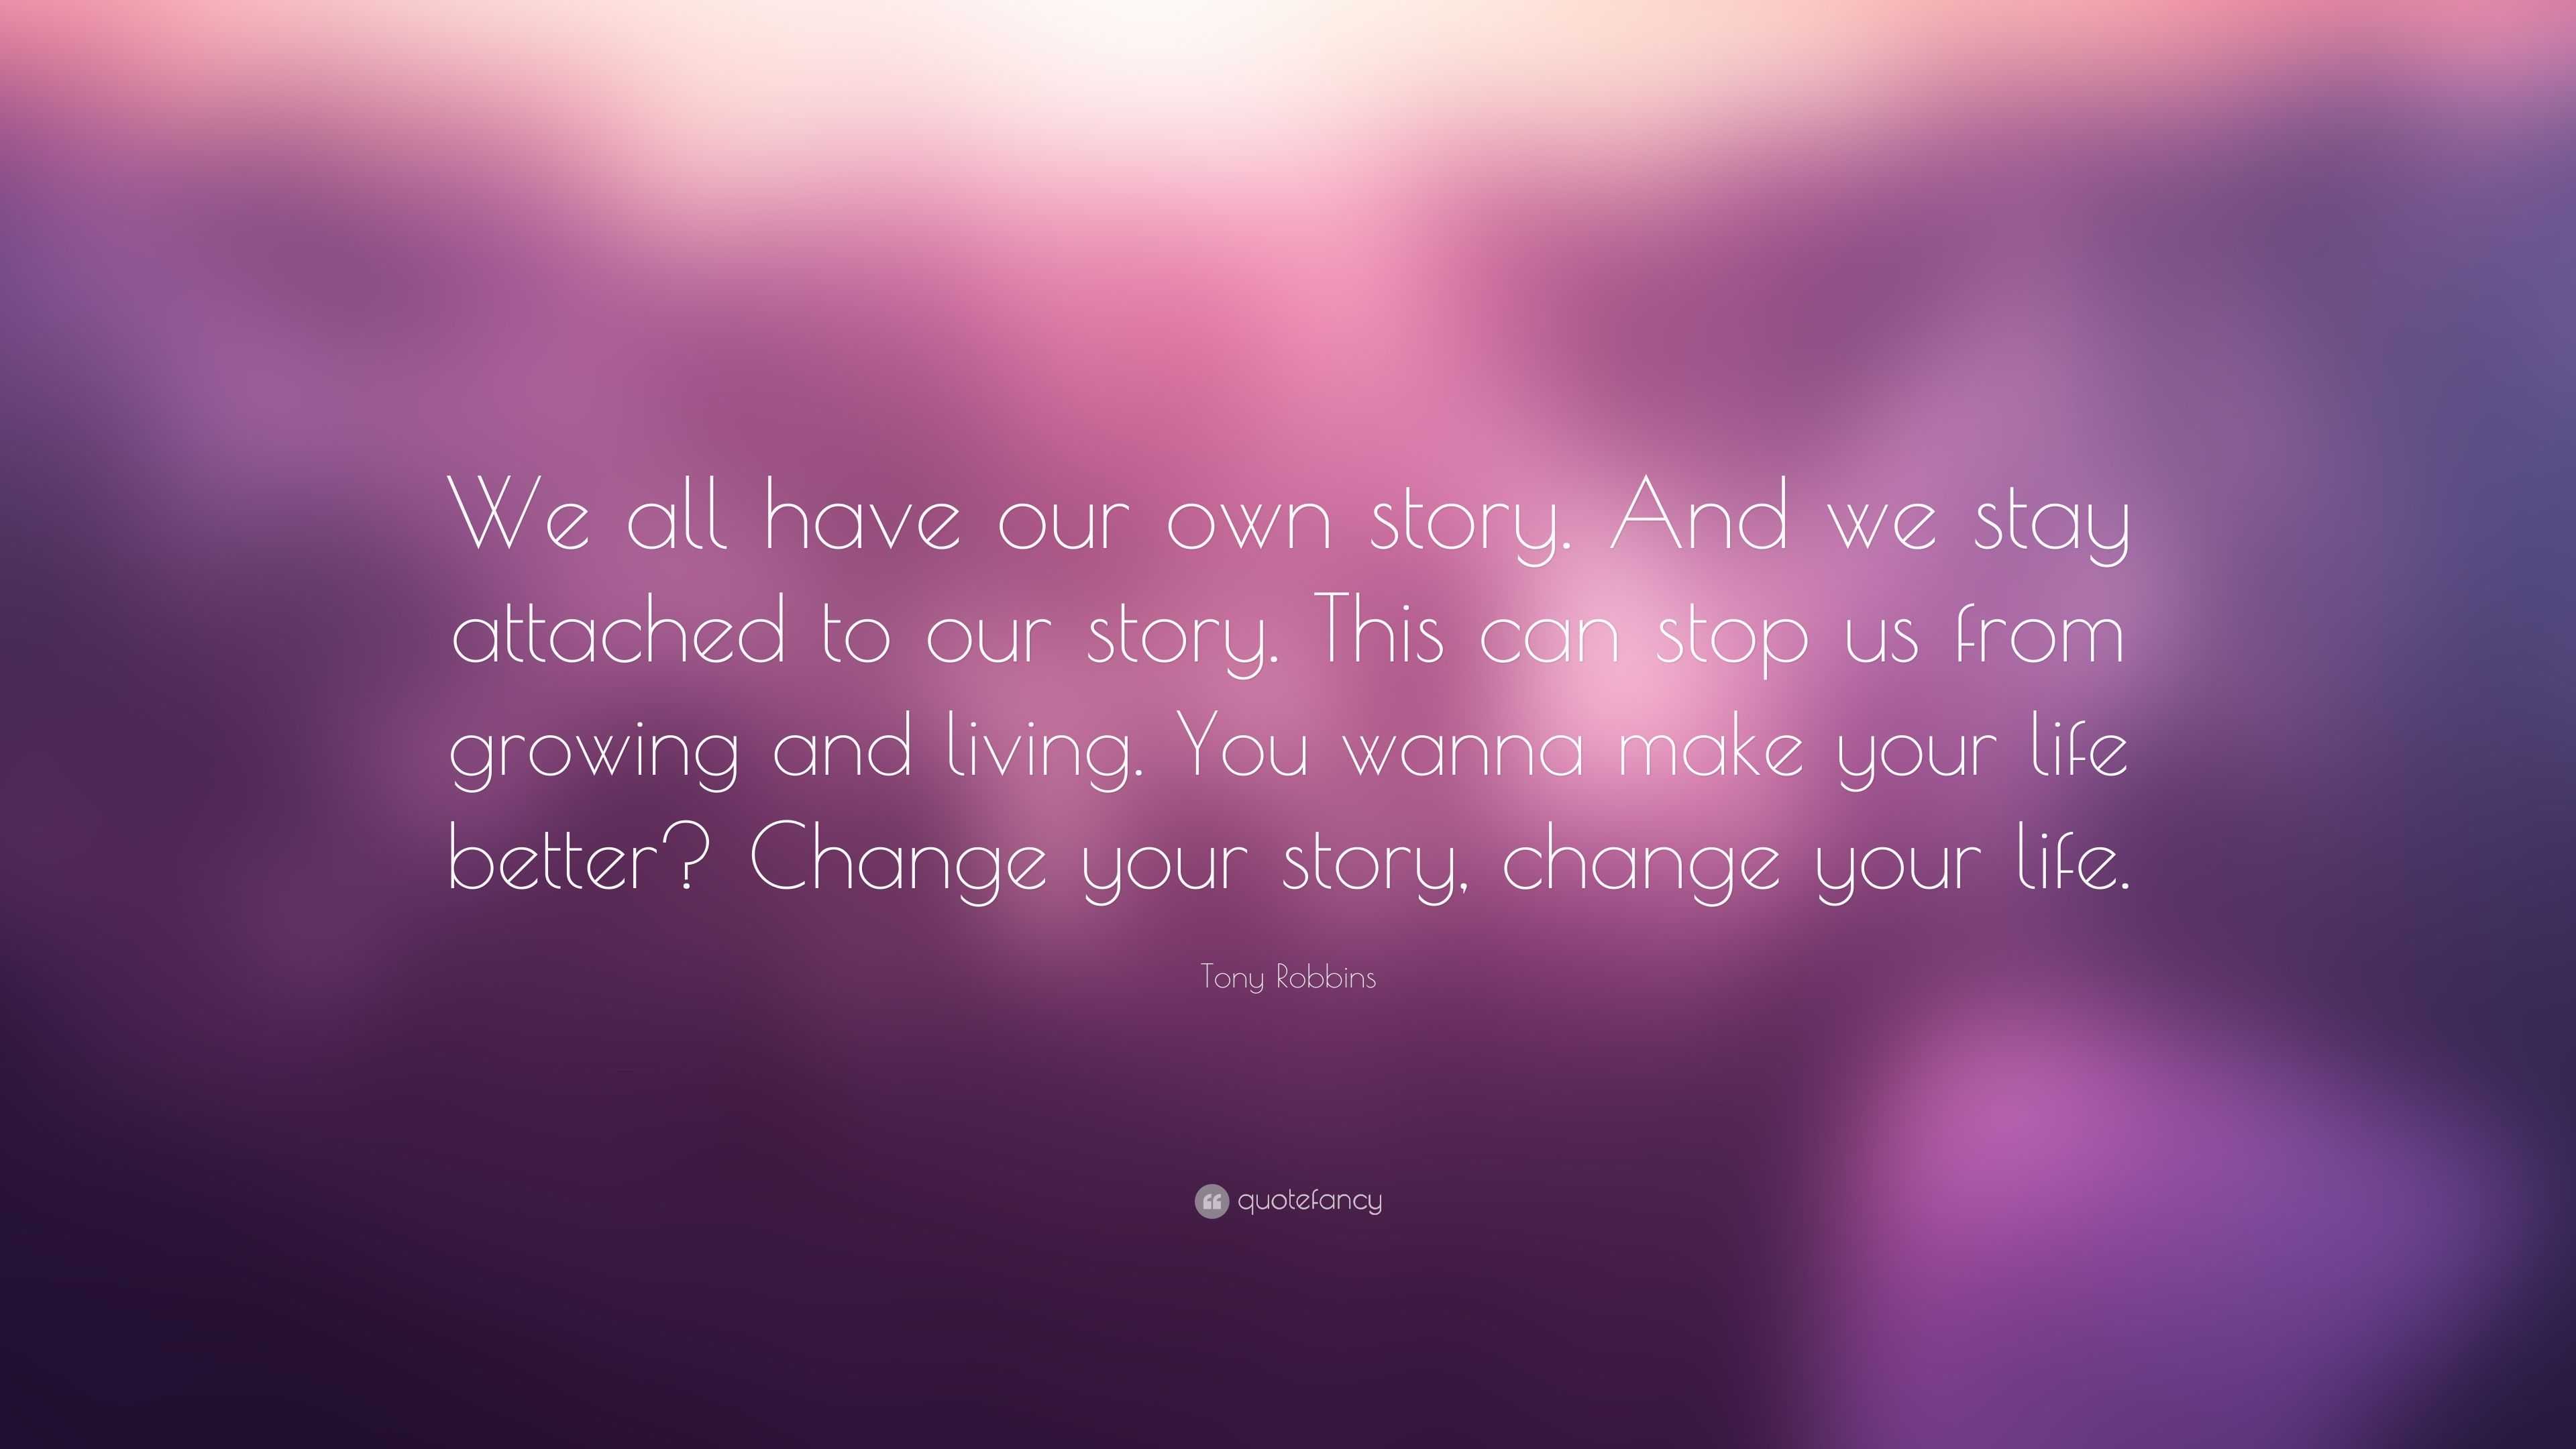 Tony Robbins Quote: “We all have our own story. And we stay attached to ...